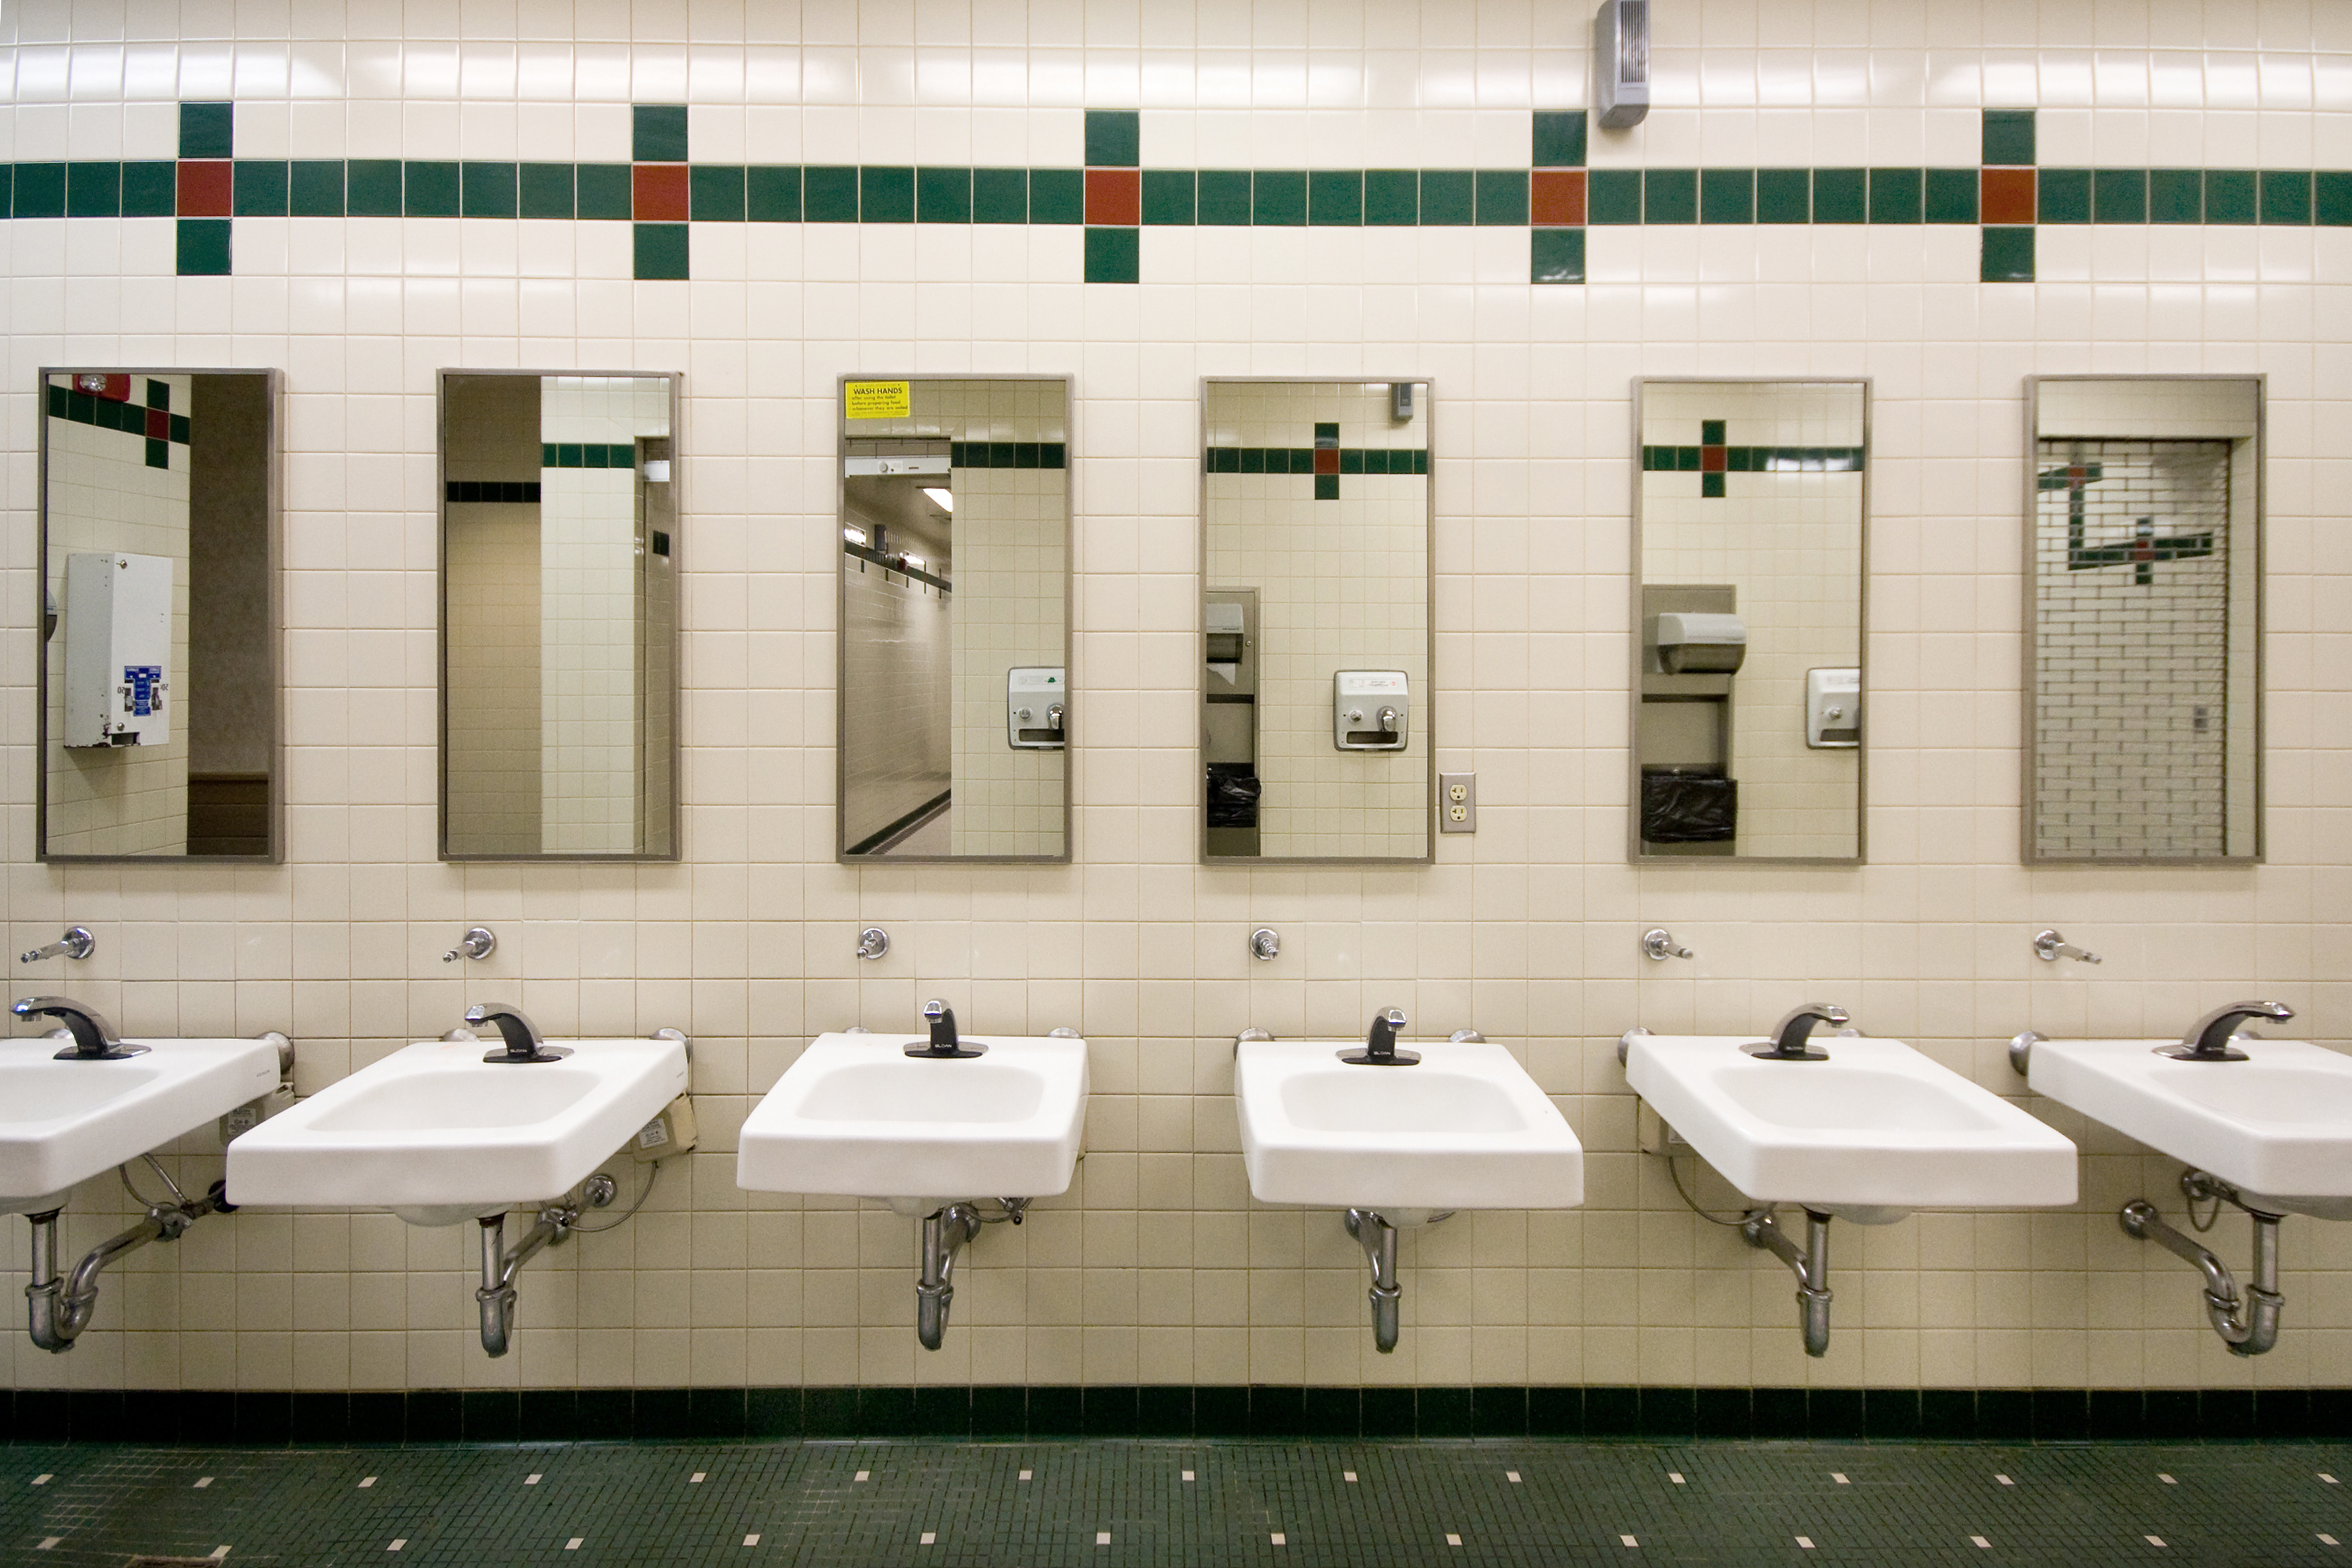 Public restroom with a line of sinks and mirrors